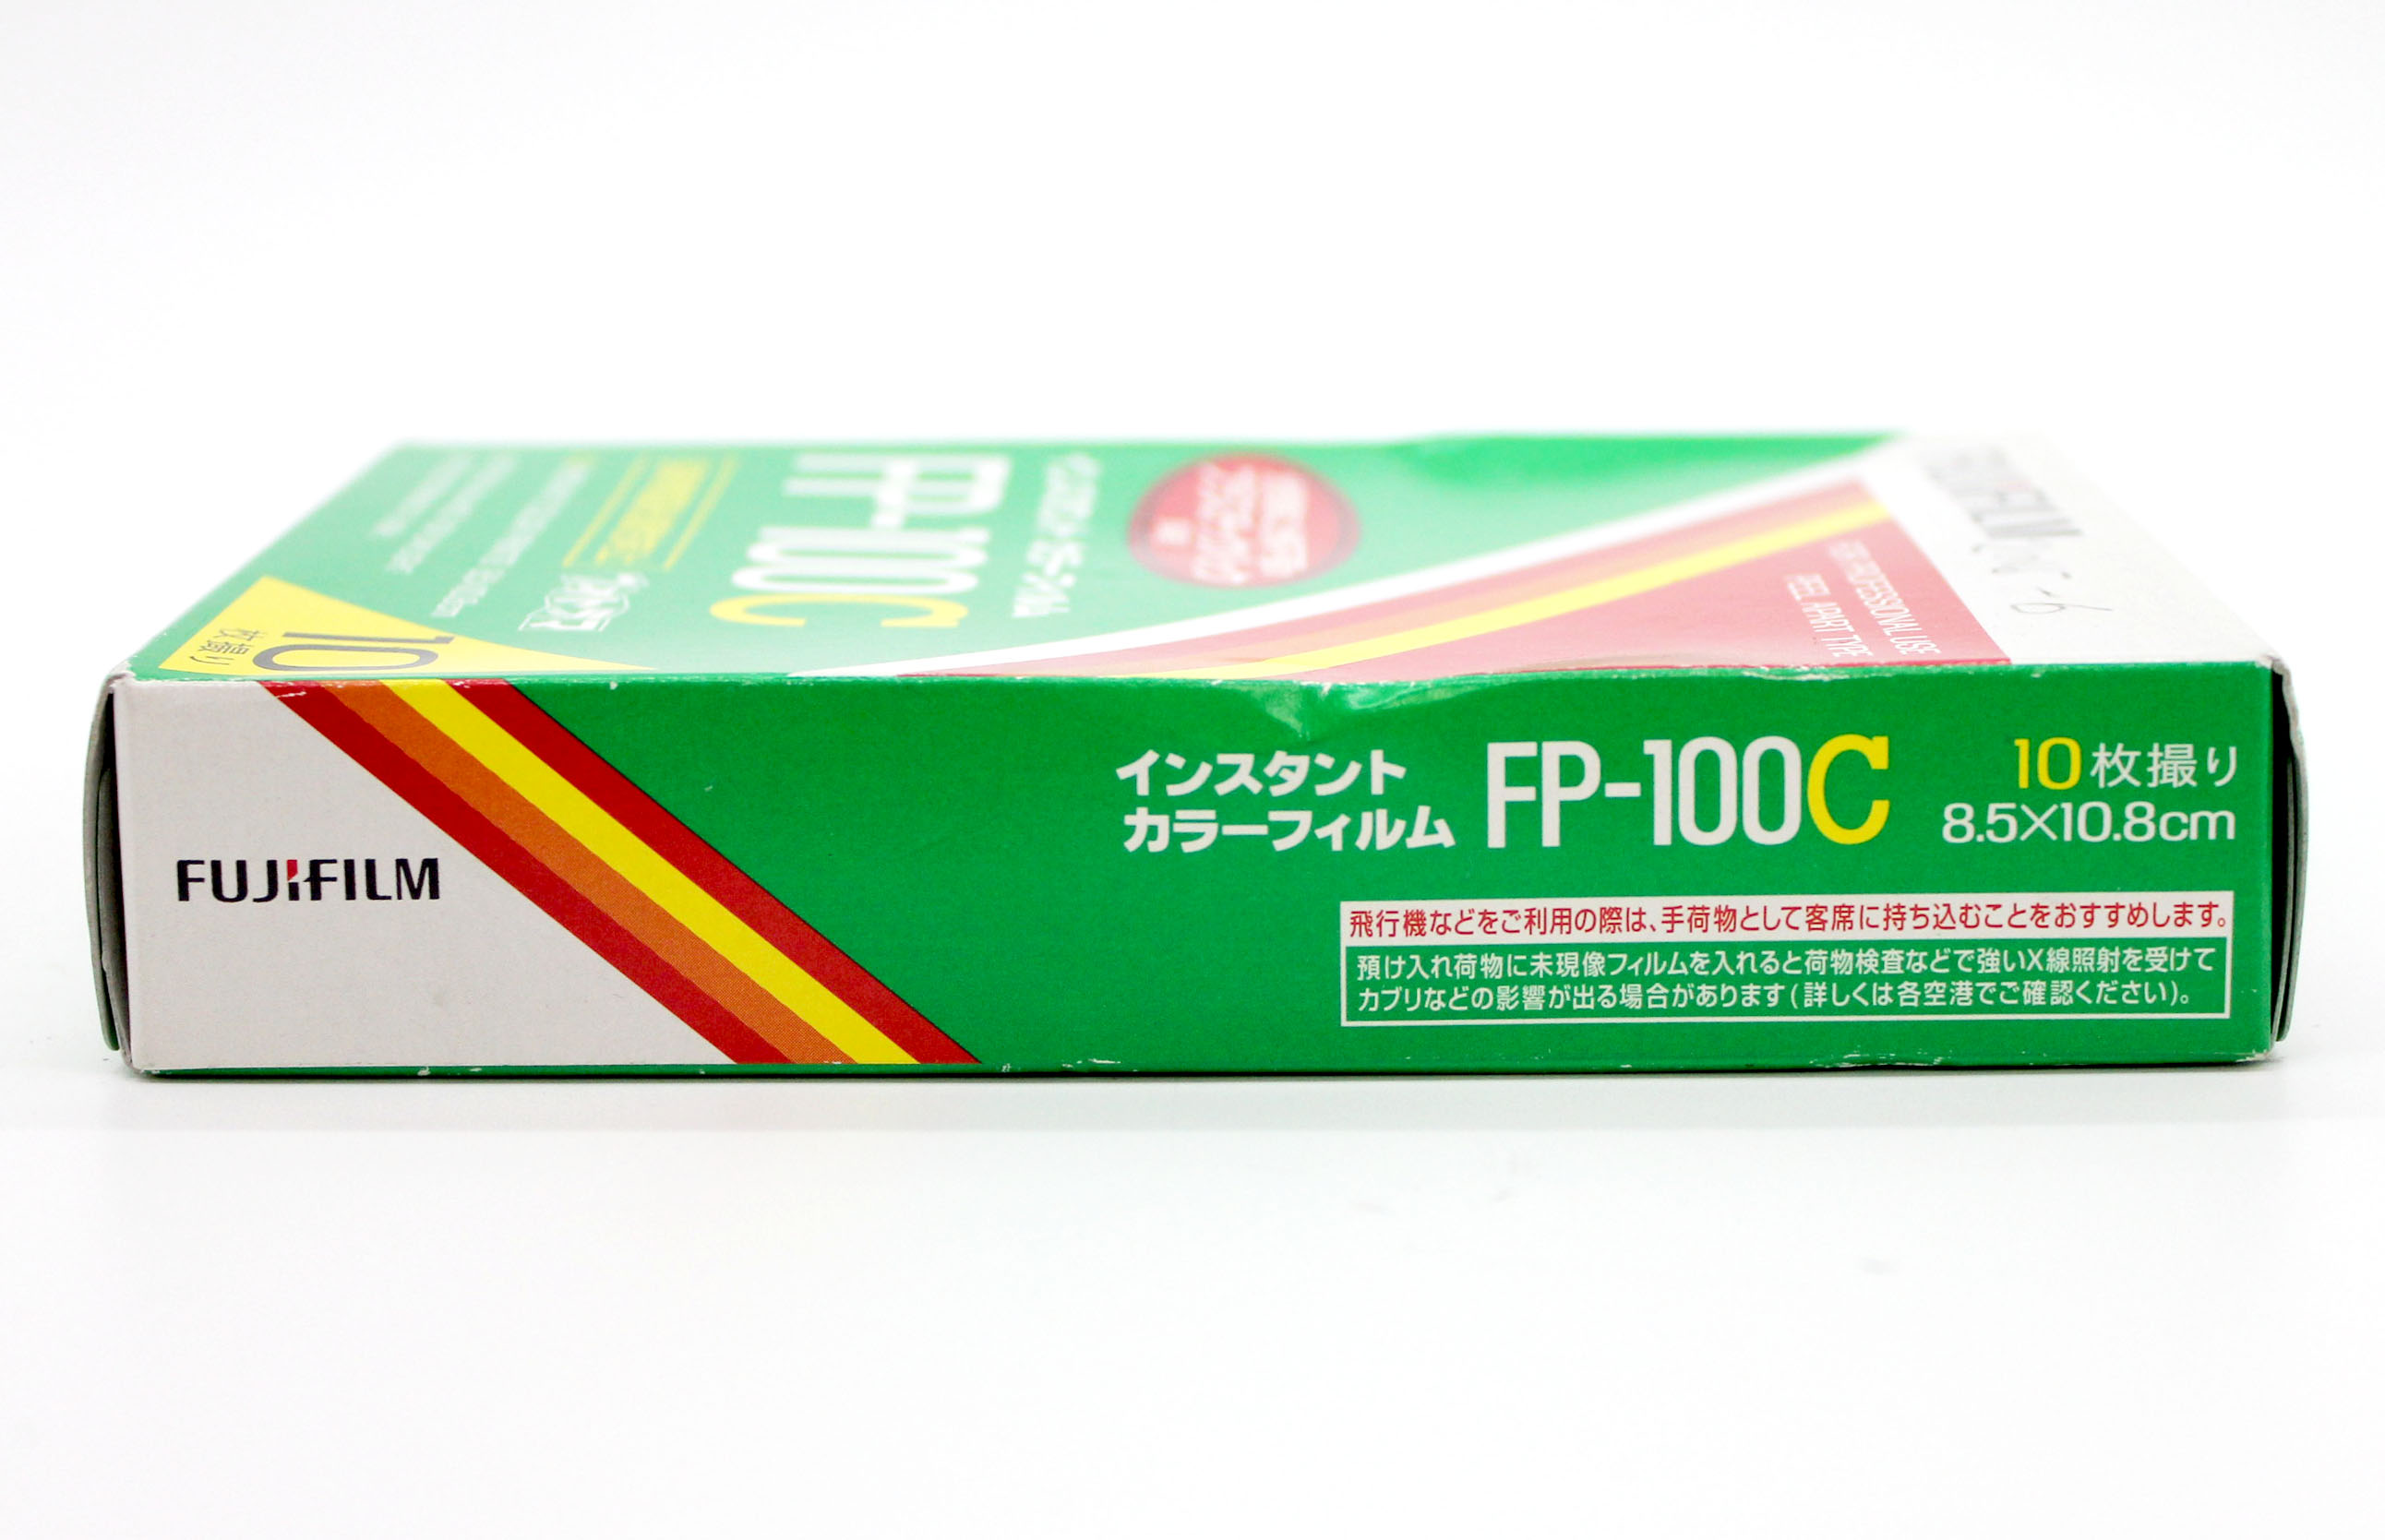  Fujifilm FP-100C Professional Instant Color Film (Expired 6/2015) from Japan Photo 6